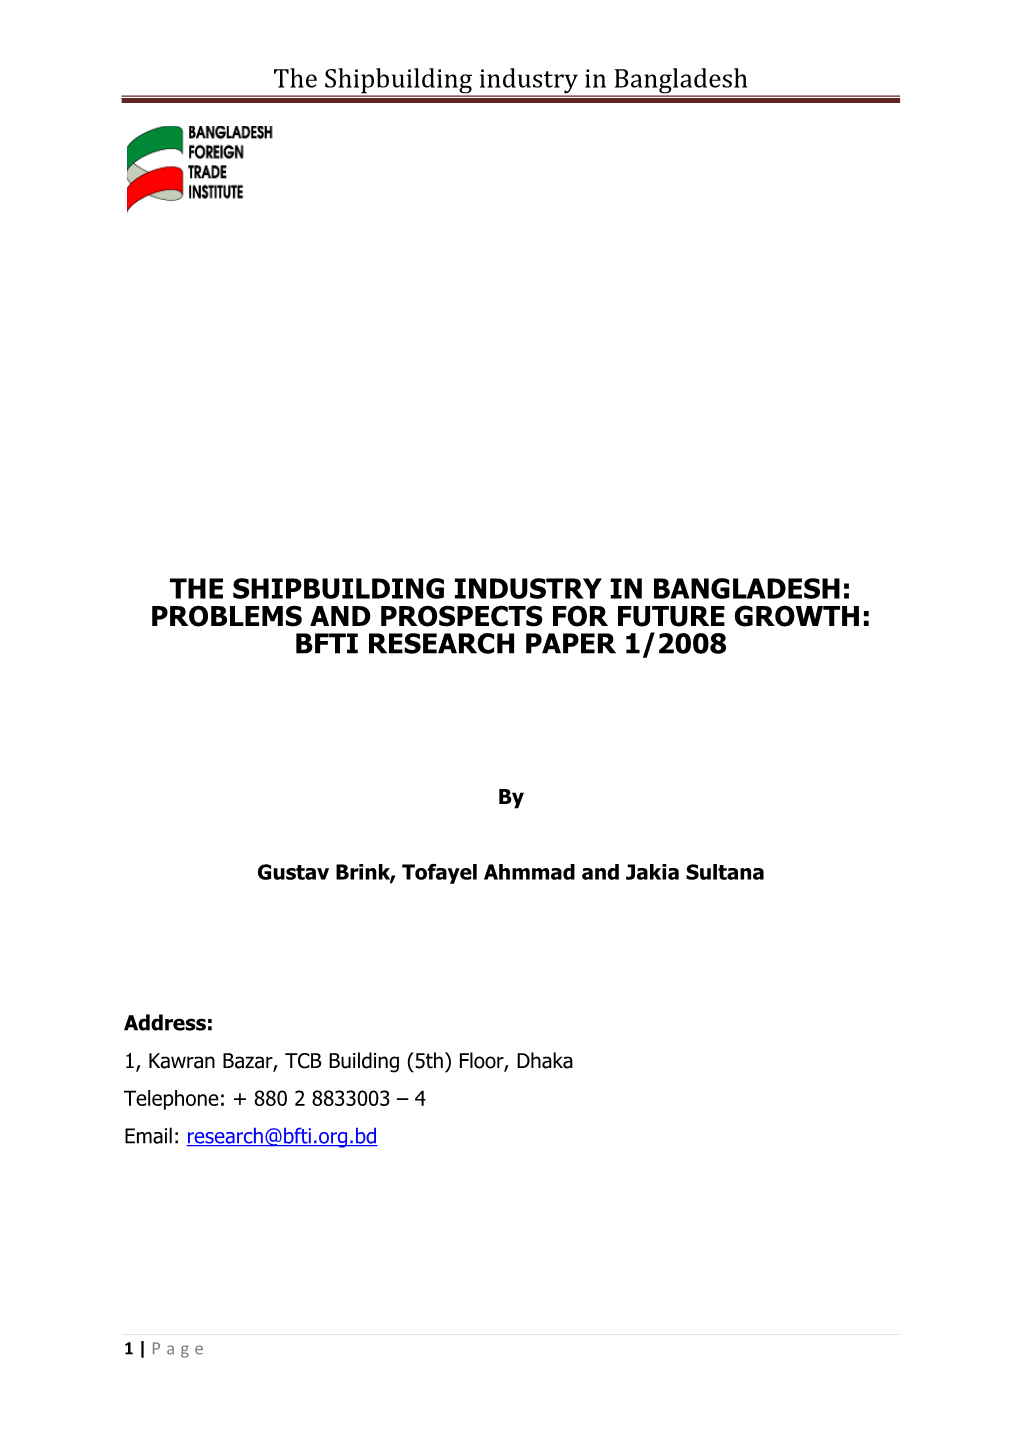 The Shipbuilding Industry in Bangladesh